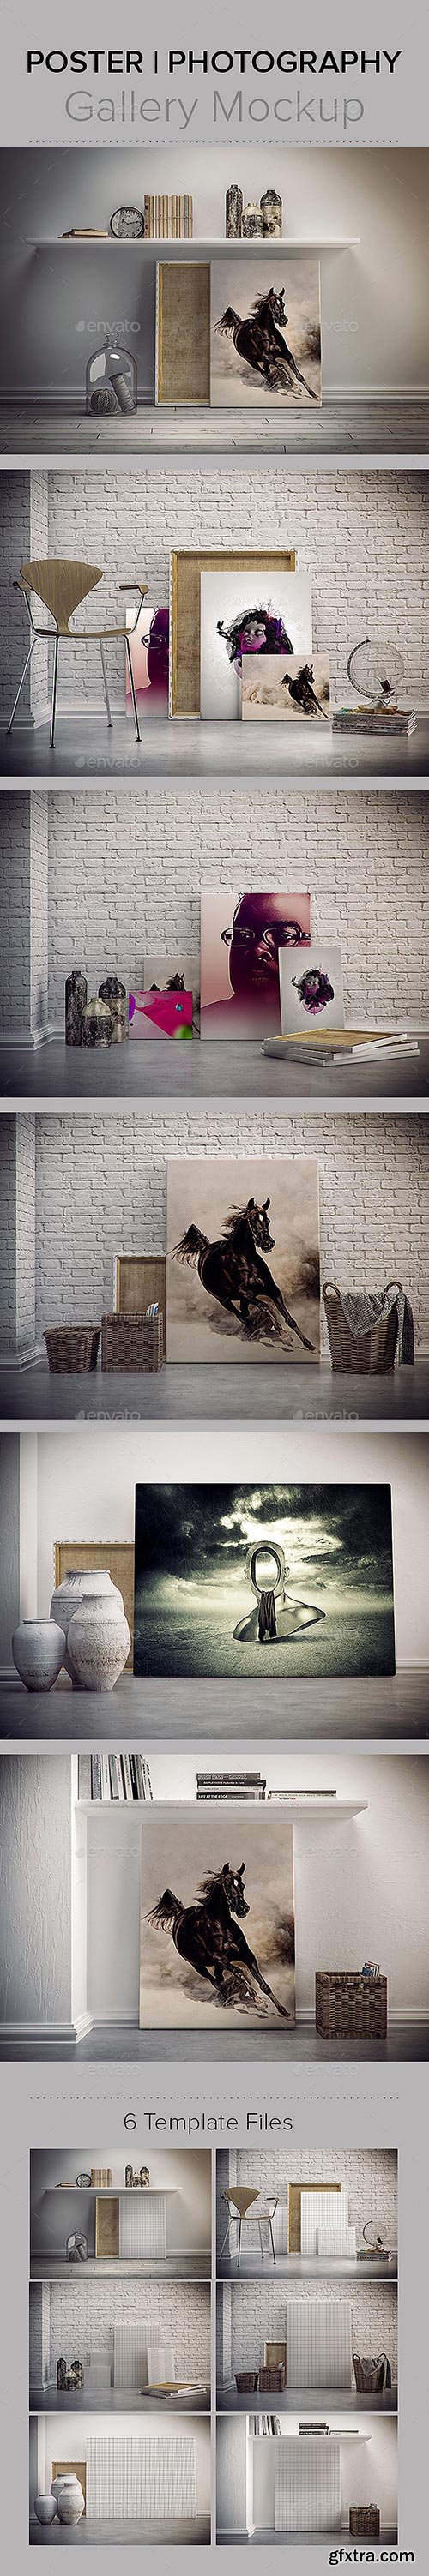 GraphicRiver - Photography / Poster GalleryMockup